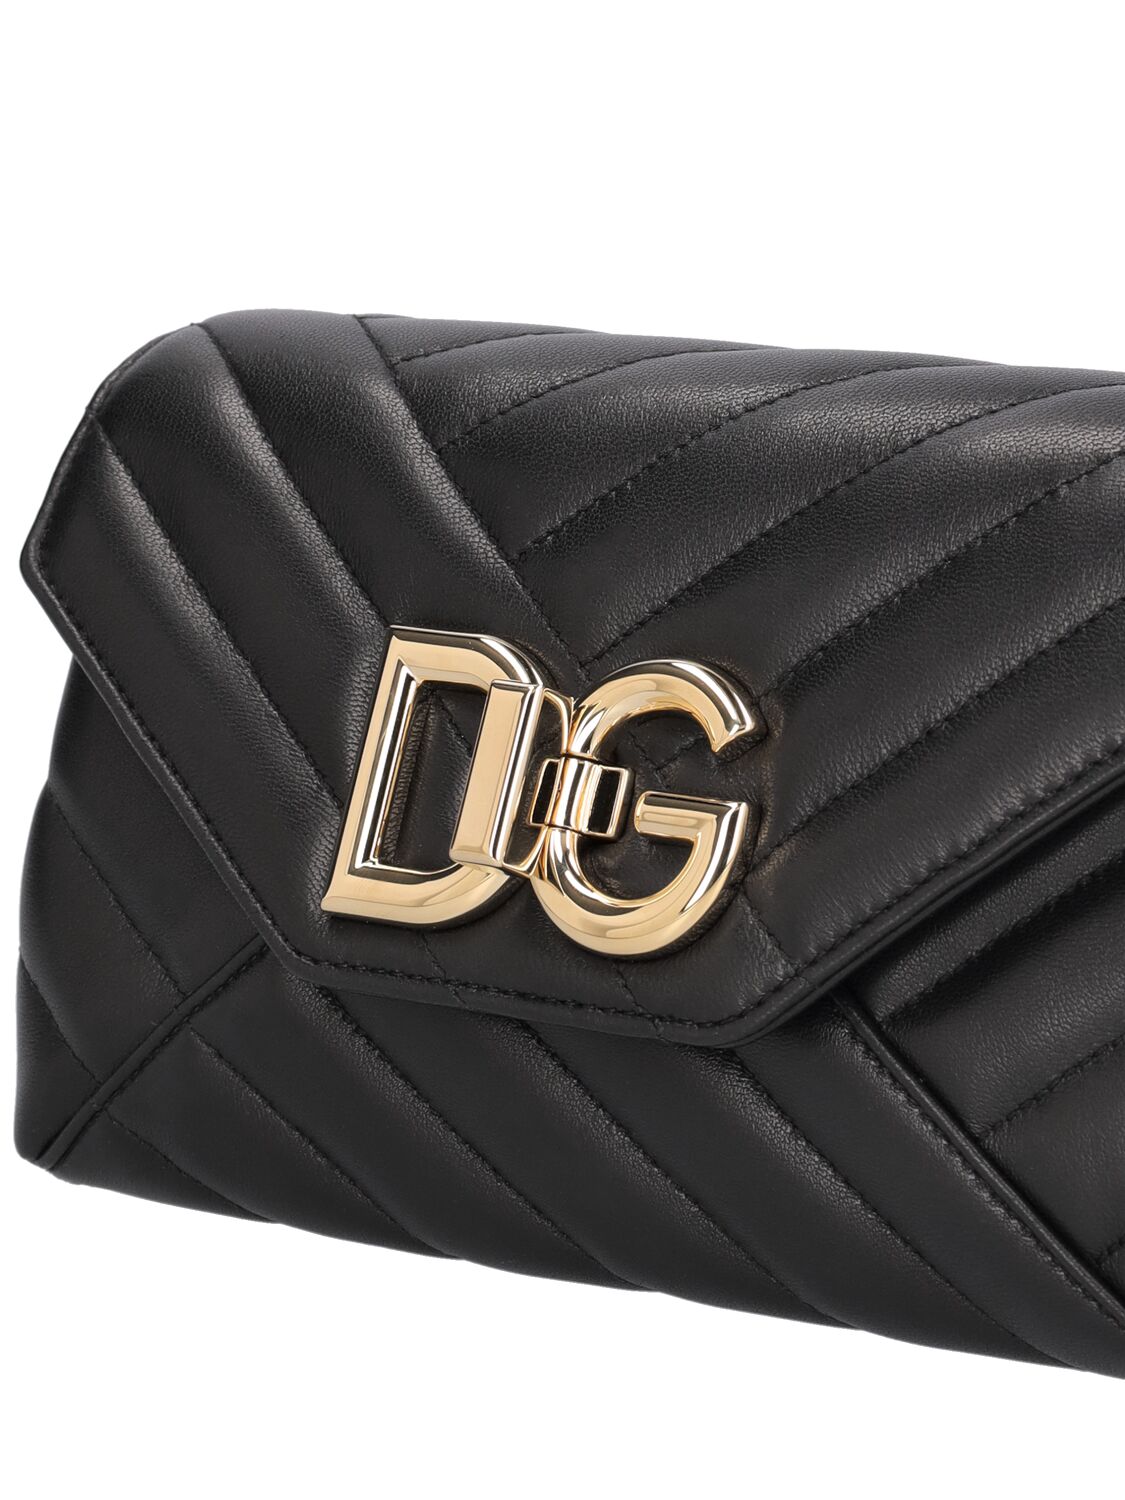 Shop Dolce & Gabbana Small Quilted Leather Shoulder Bag In Black